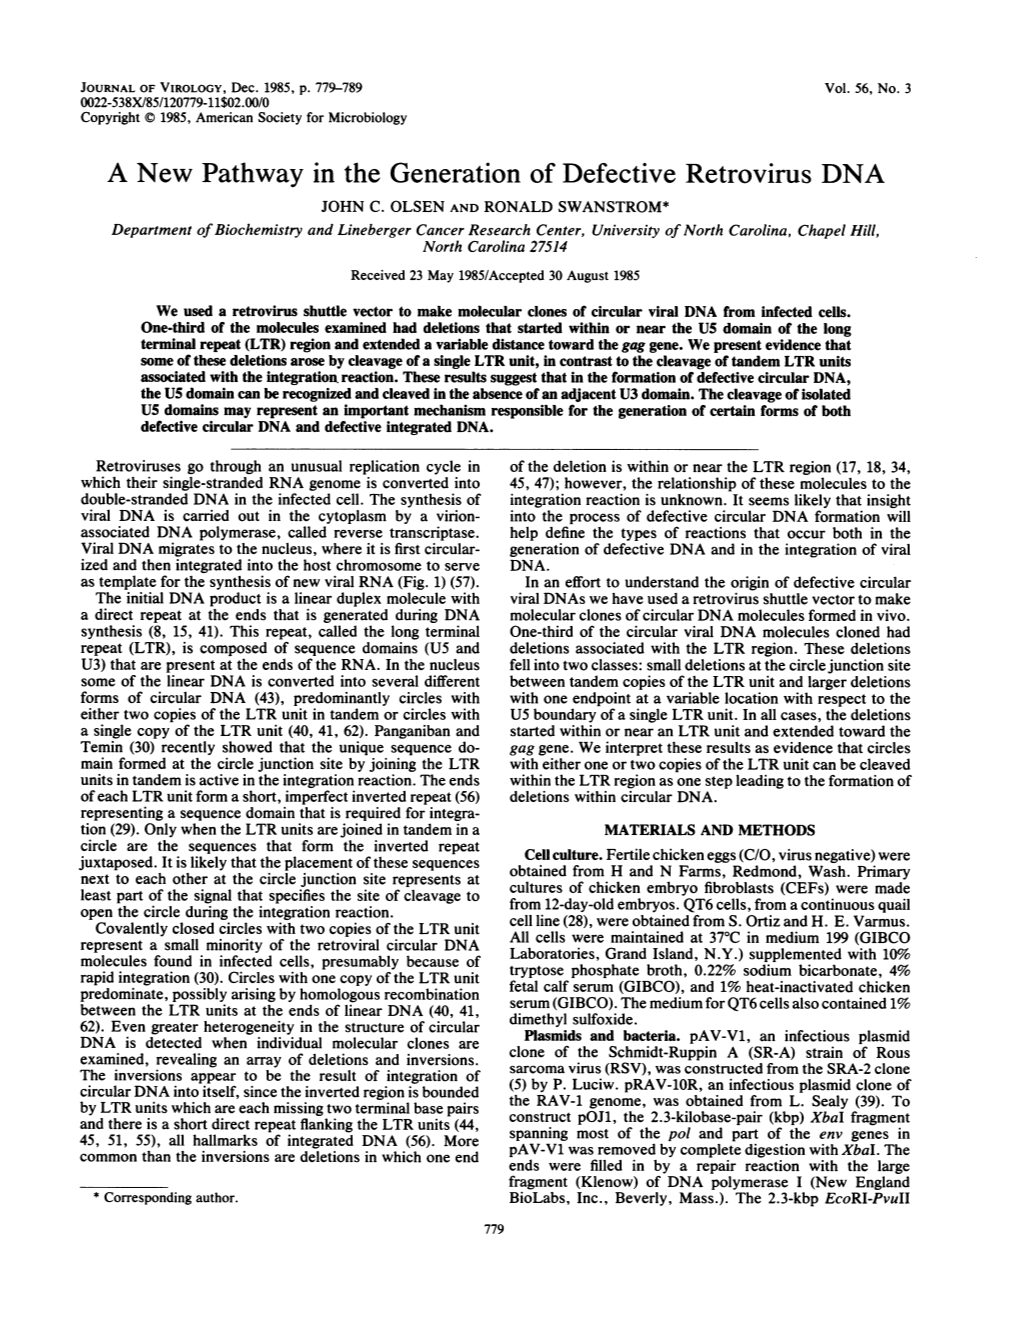 A New Pathway in the Generation of Defective Retrovirus DNA JOHN C